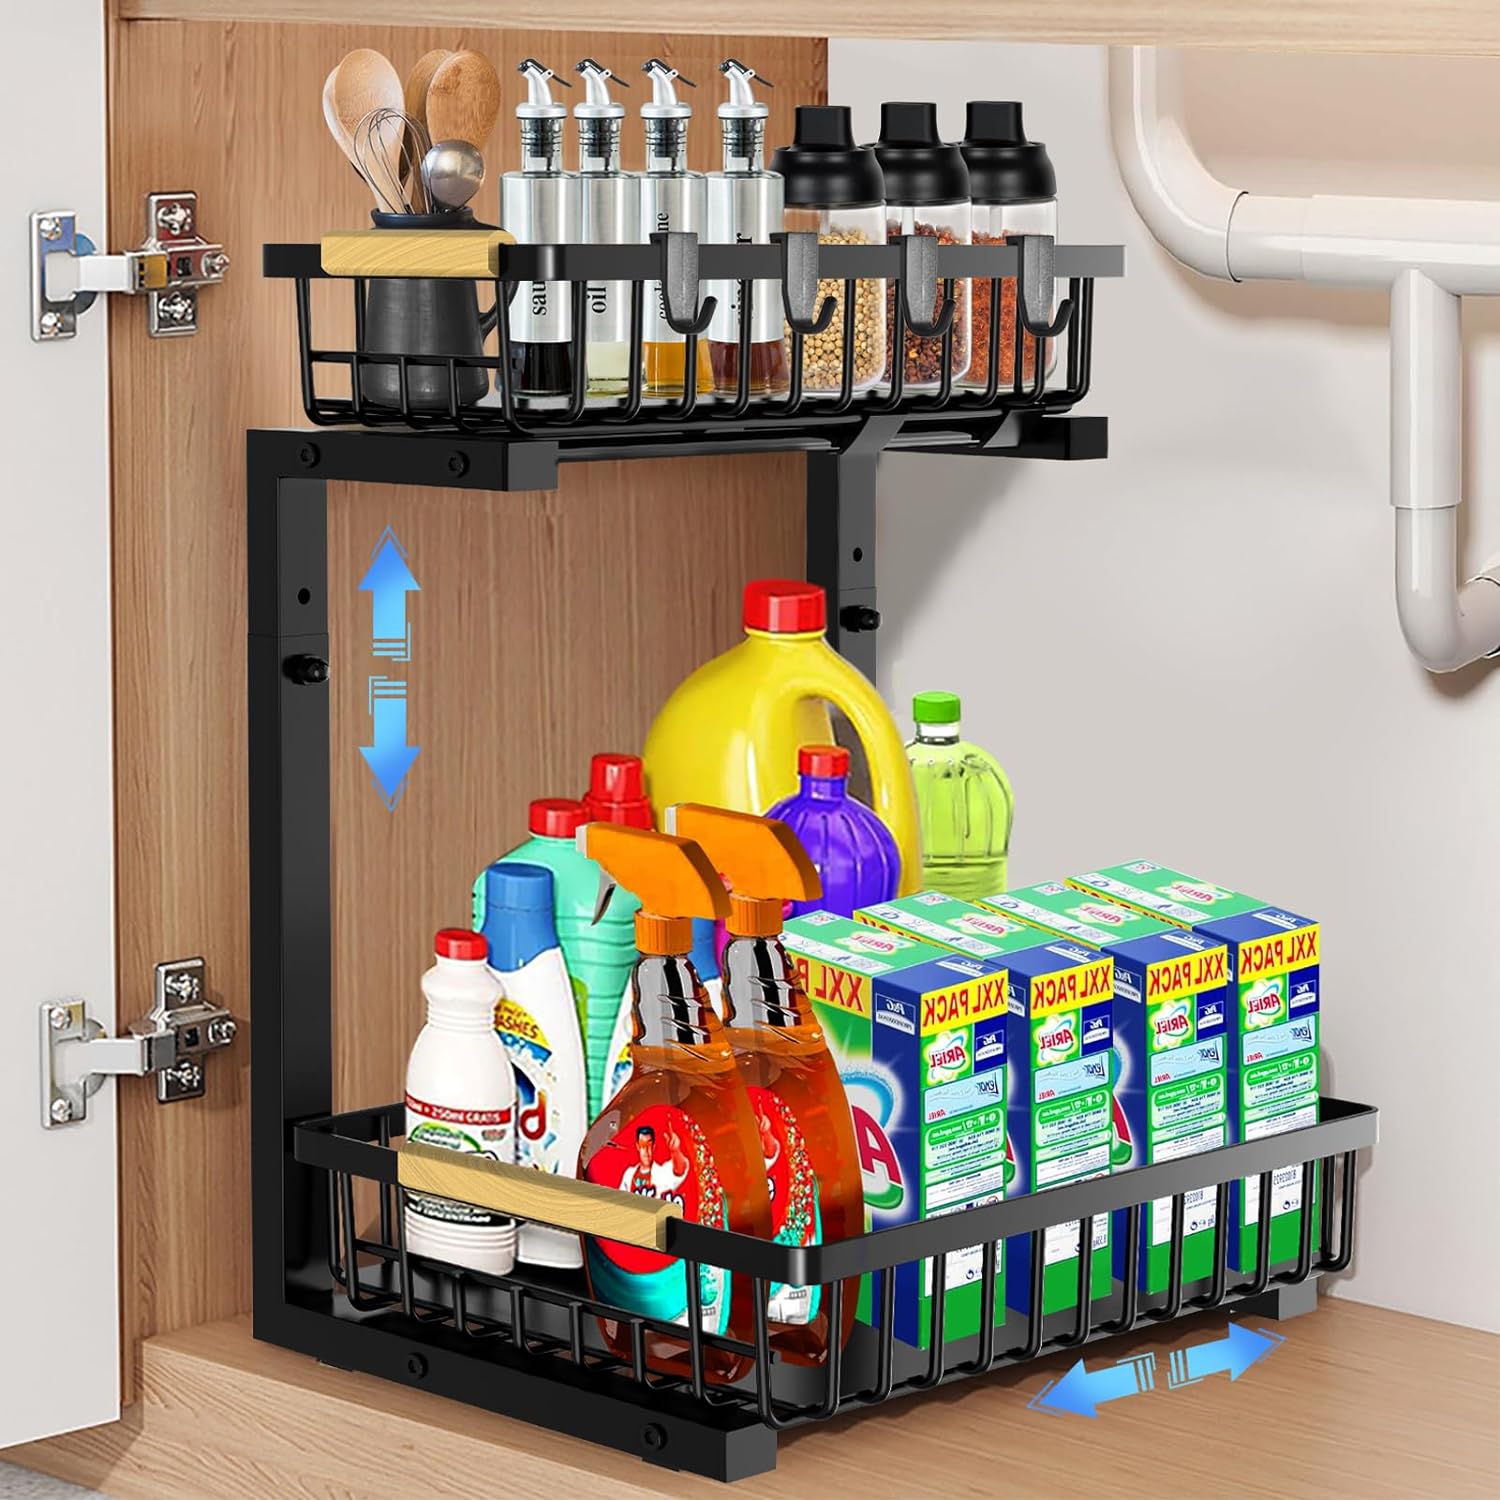 Under Sink Organizer: Adjustable Height 2-Tier Under Bathroom Sink Organizers Multi-Purpose Bathroom Cabinet Pull Out Drawers for Kitchen Cabinets with Hooks